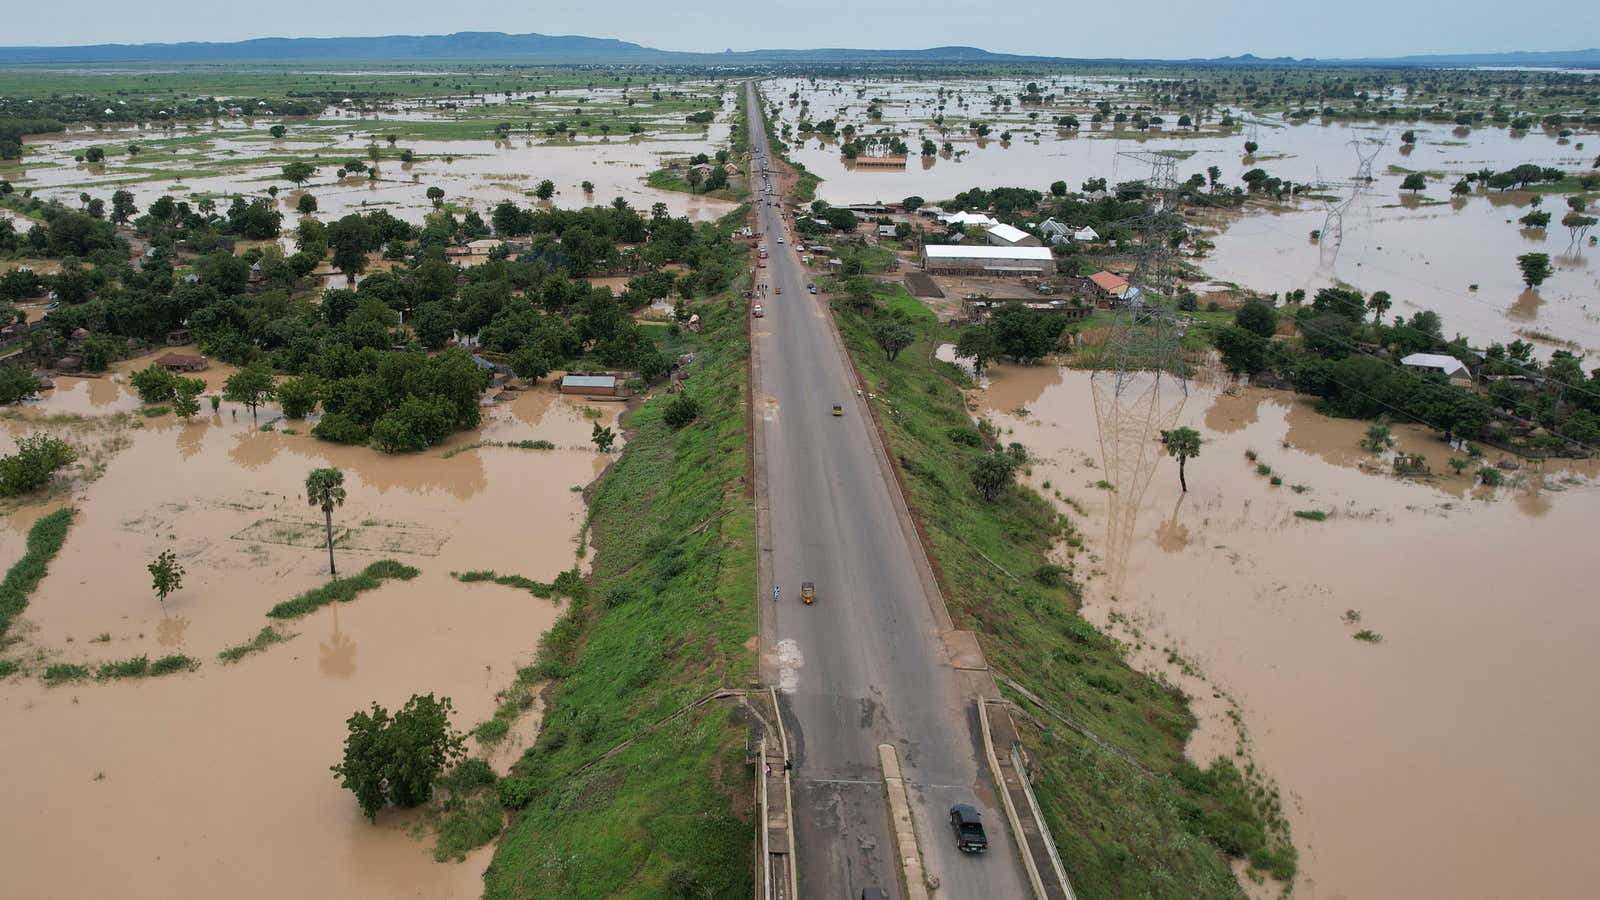 Across west and central Africa devastating floods are ravaging farmland, destroying crops, and forcing people to abandon their homes.